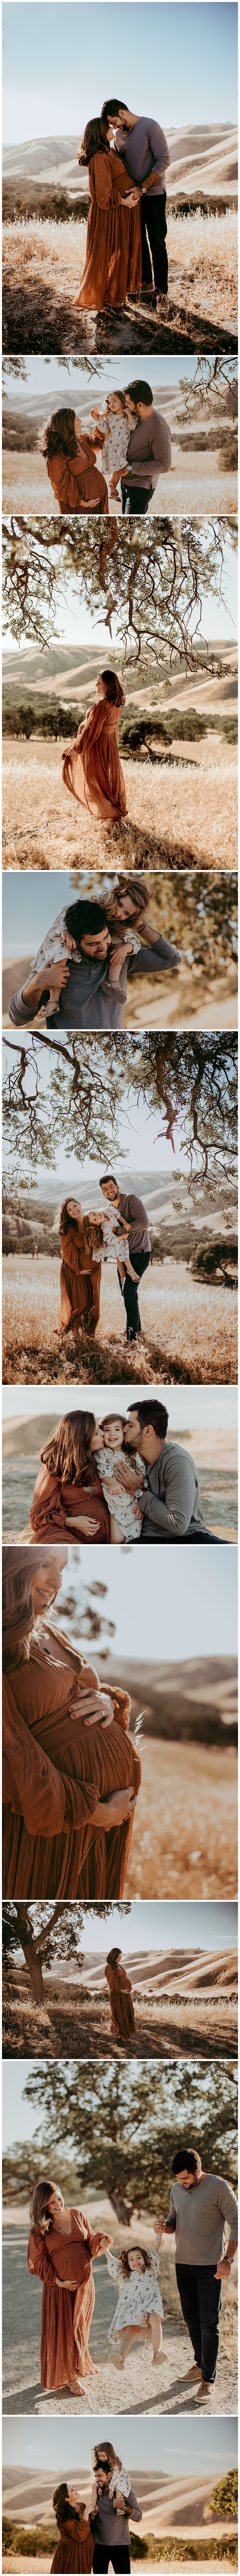 Maternity photos in Livermore, CA taken by Janaisa Port Photography, a bay area maternity photographer.